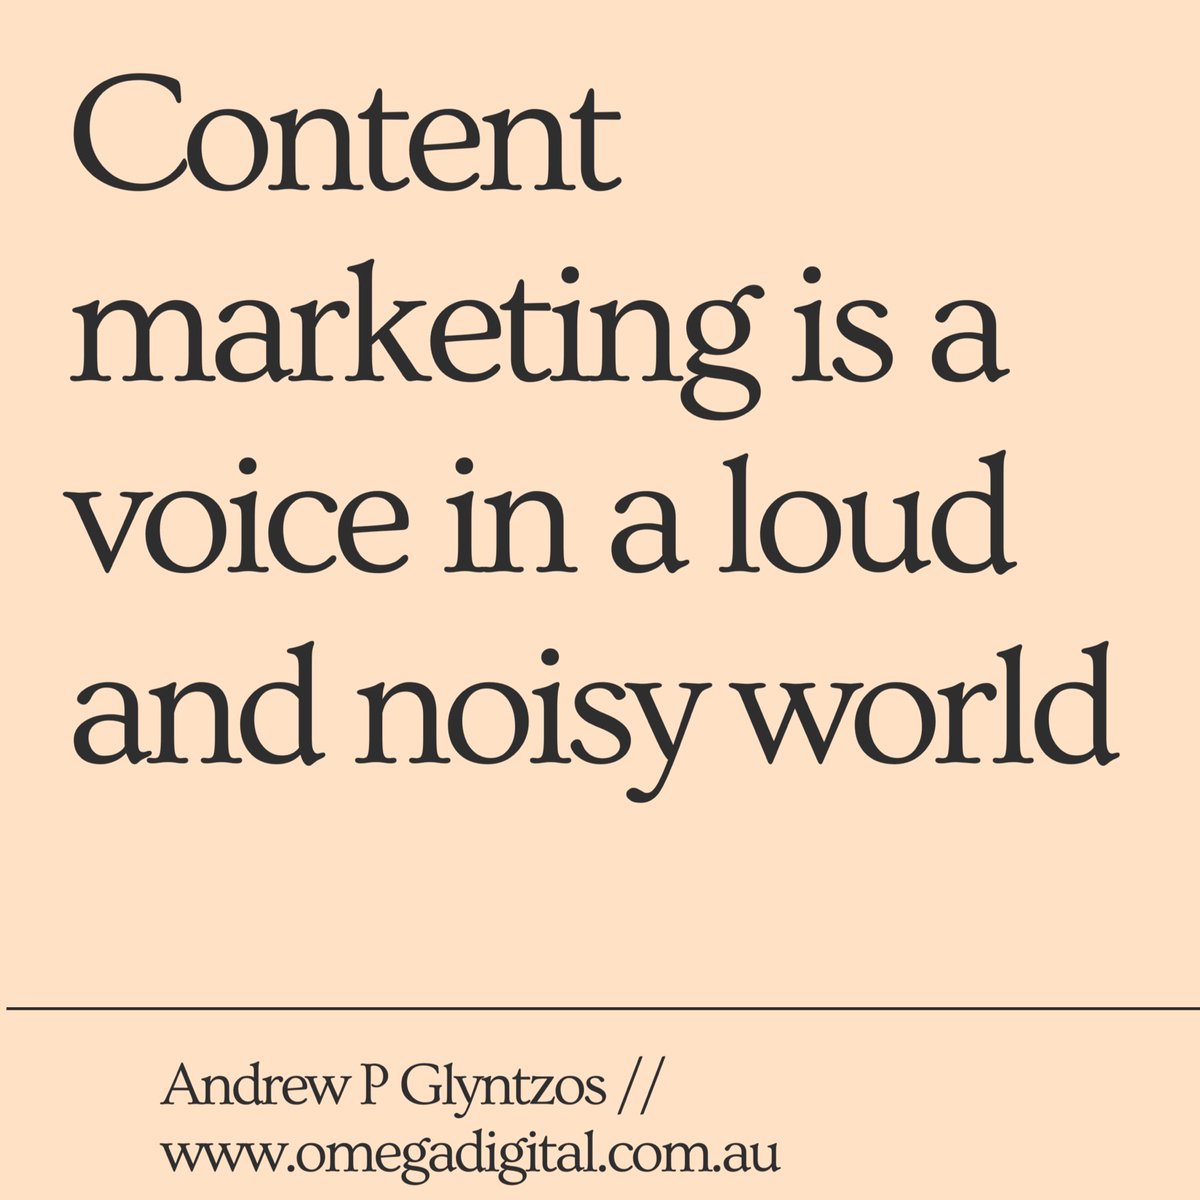 @andrewglyntzos content marketing quote of 2020. #contentmarketing #seo #digitalmarketing #marketingquote